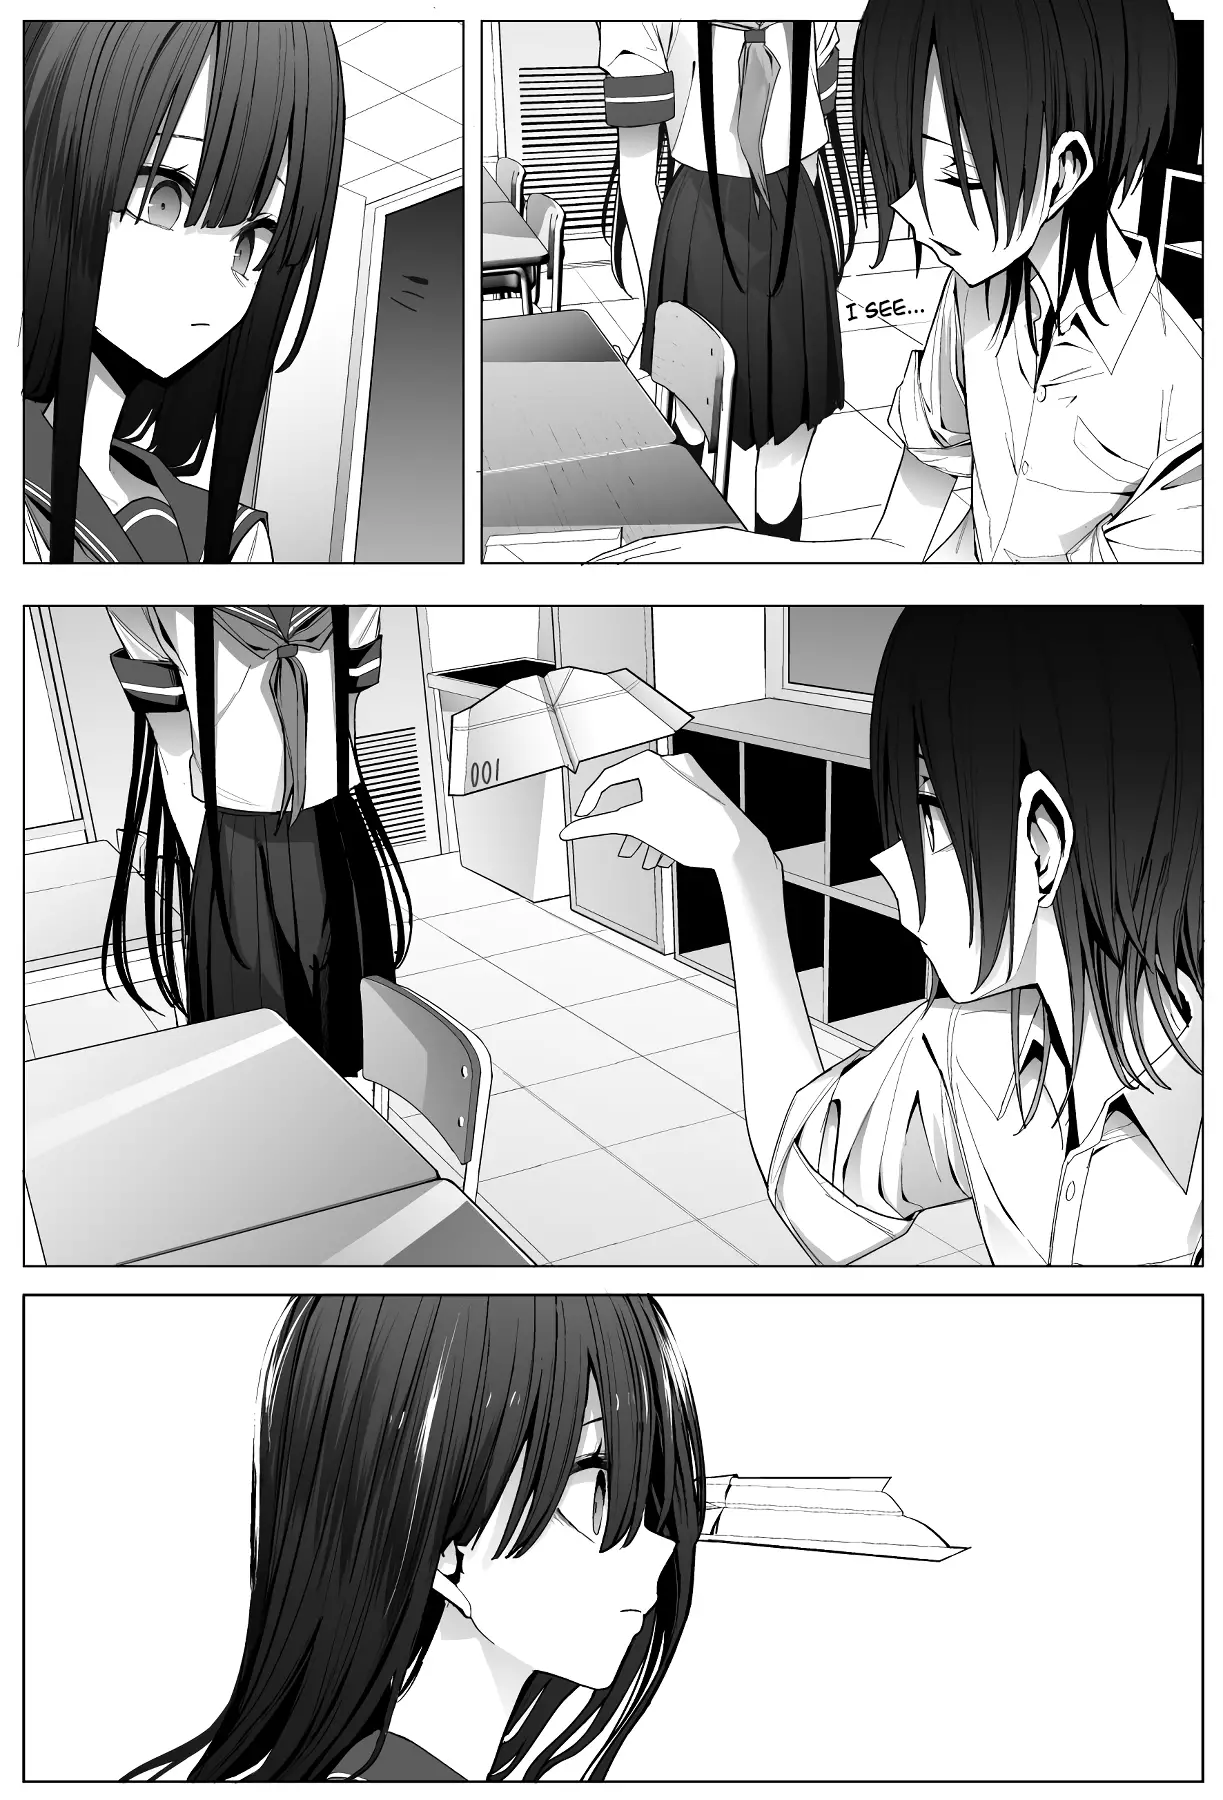 Mitsuishi-San Is Being Weird This Year - 23 page 10-16c38983